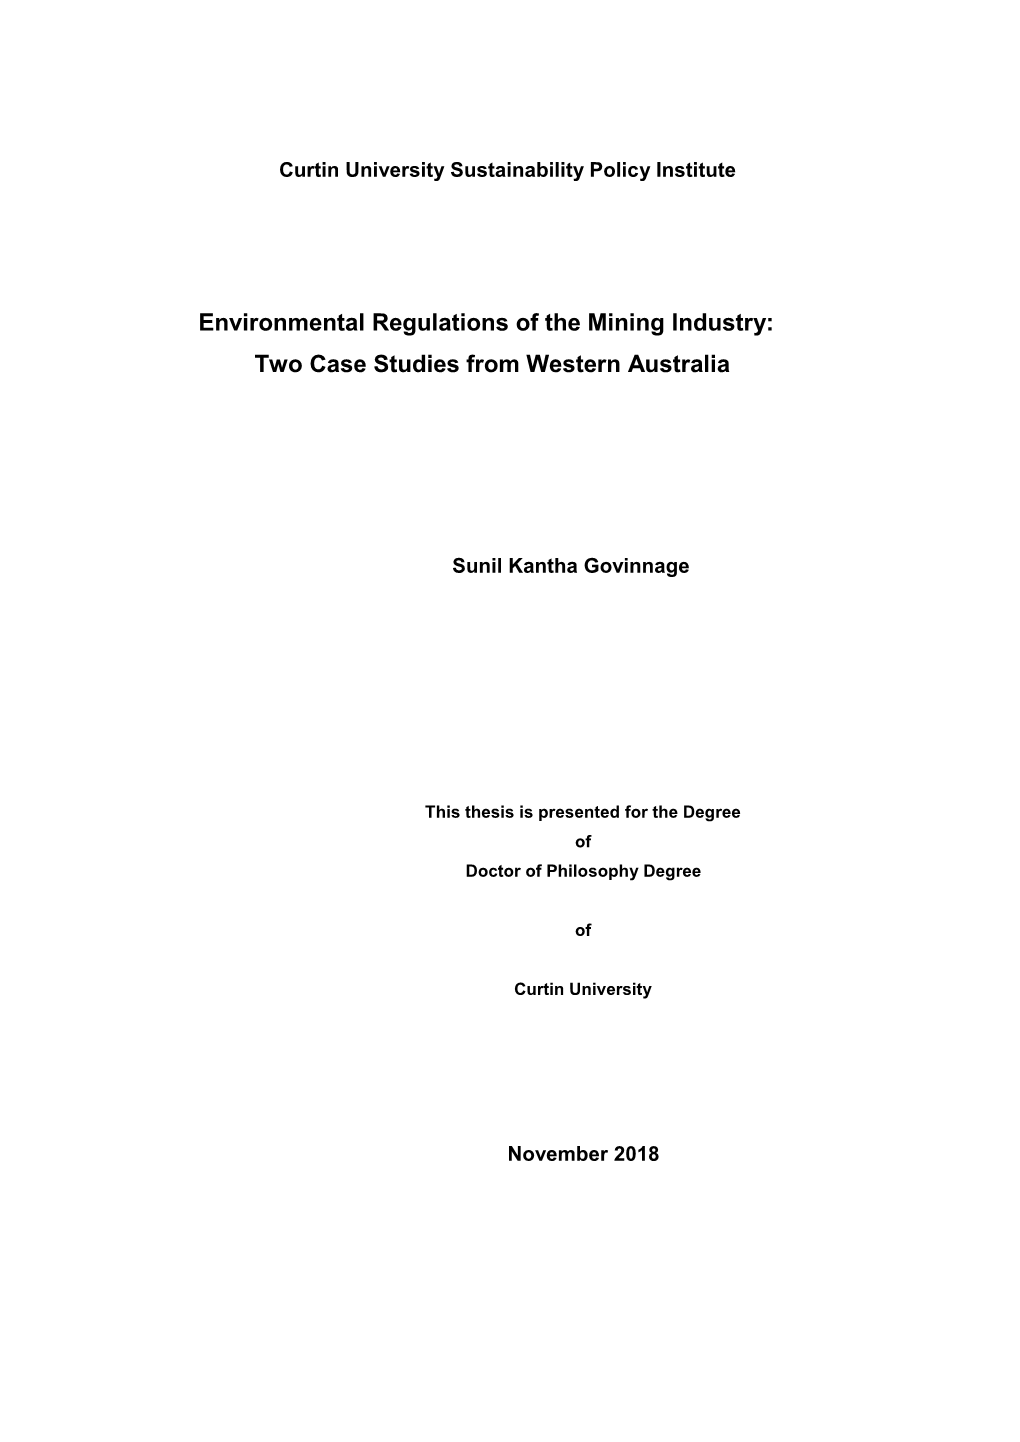 Environmental Regulations of the Mining Industry: Two Case Studies from Western Australia